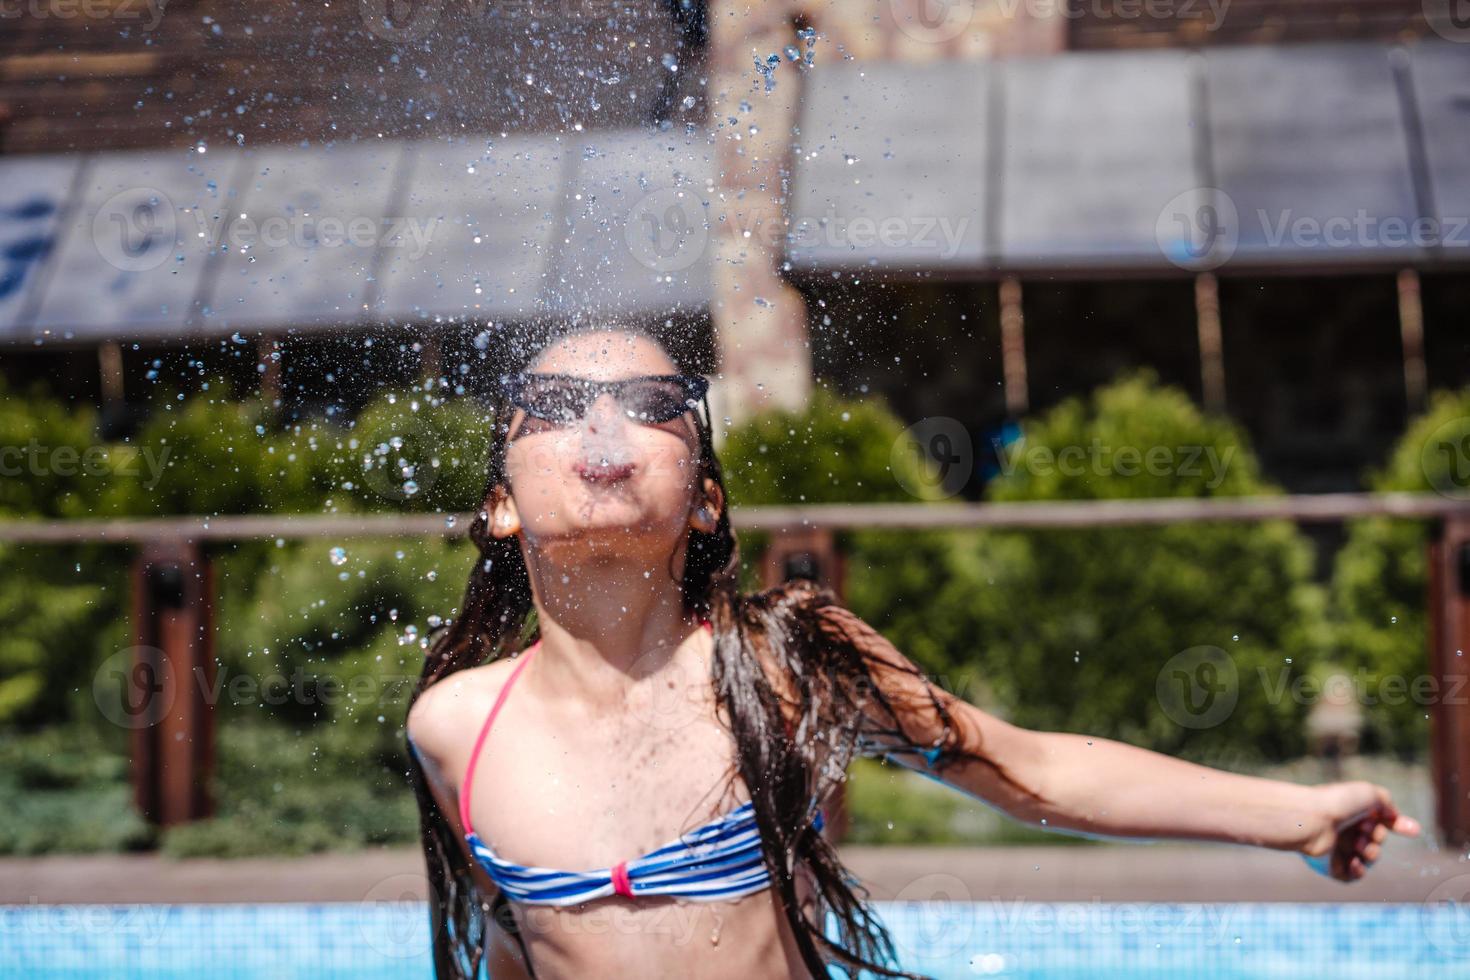 Girl sprinkles water from her mouth, outdoor photo